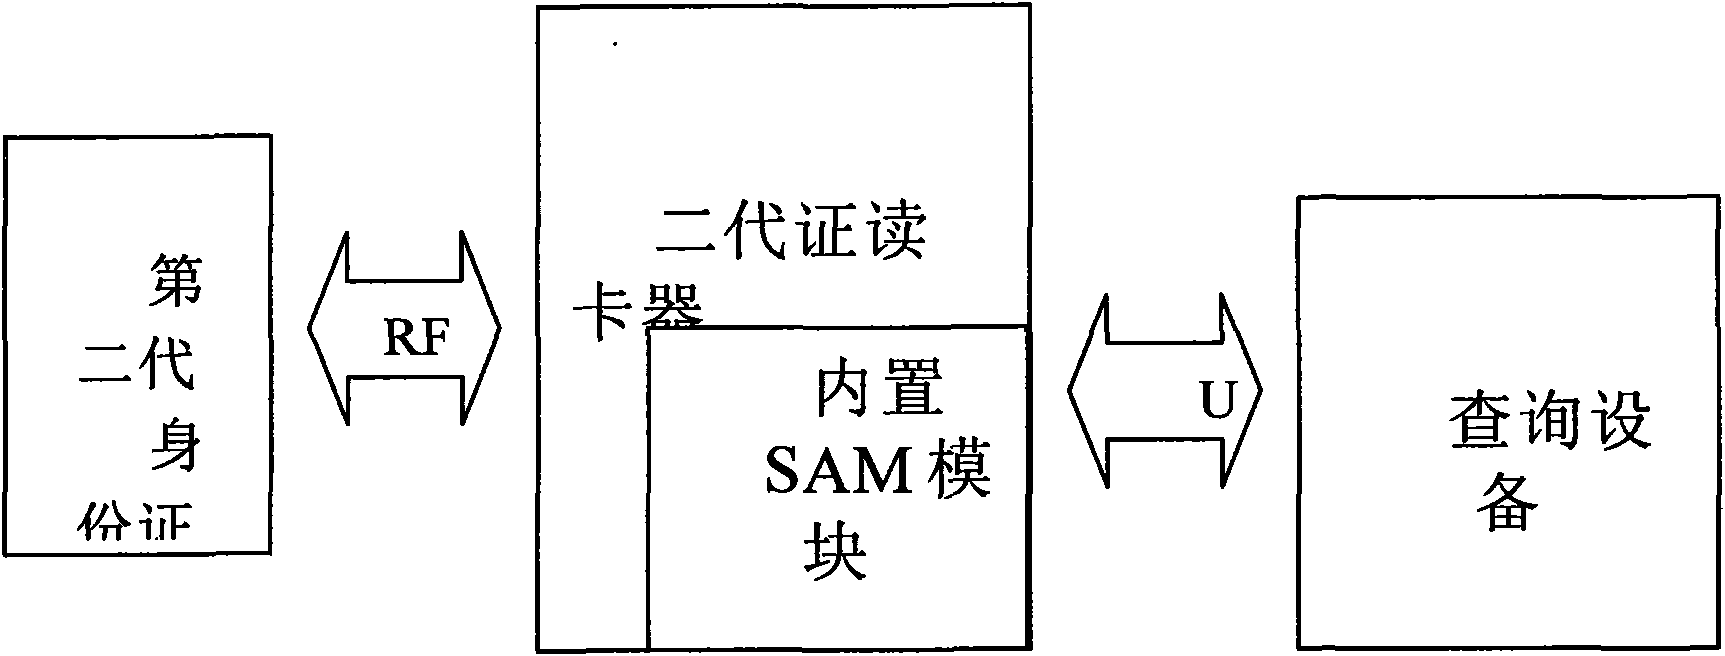 Second-generation ID card online inquiry system and method based on secure network